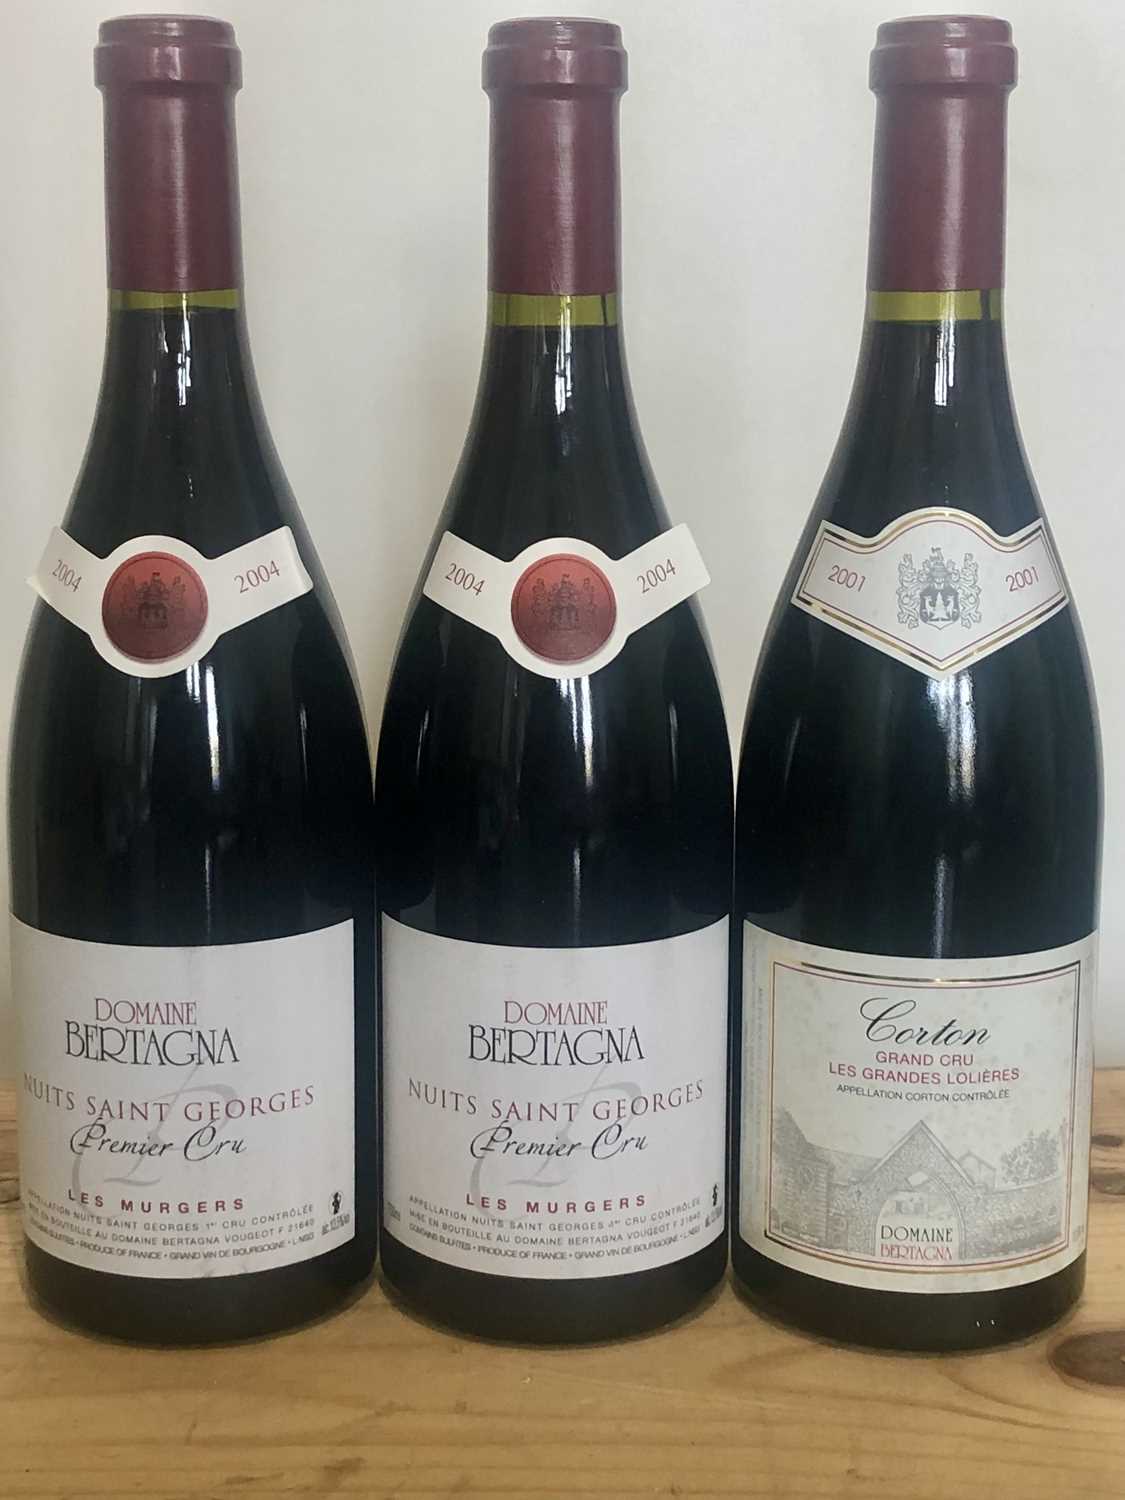 Lot 44 - 3 bottles mixed lot fine mature classic red burgundy from Domaine Bertagna